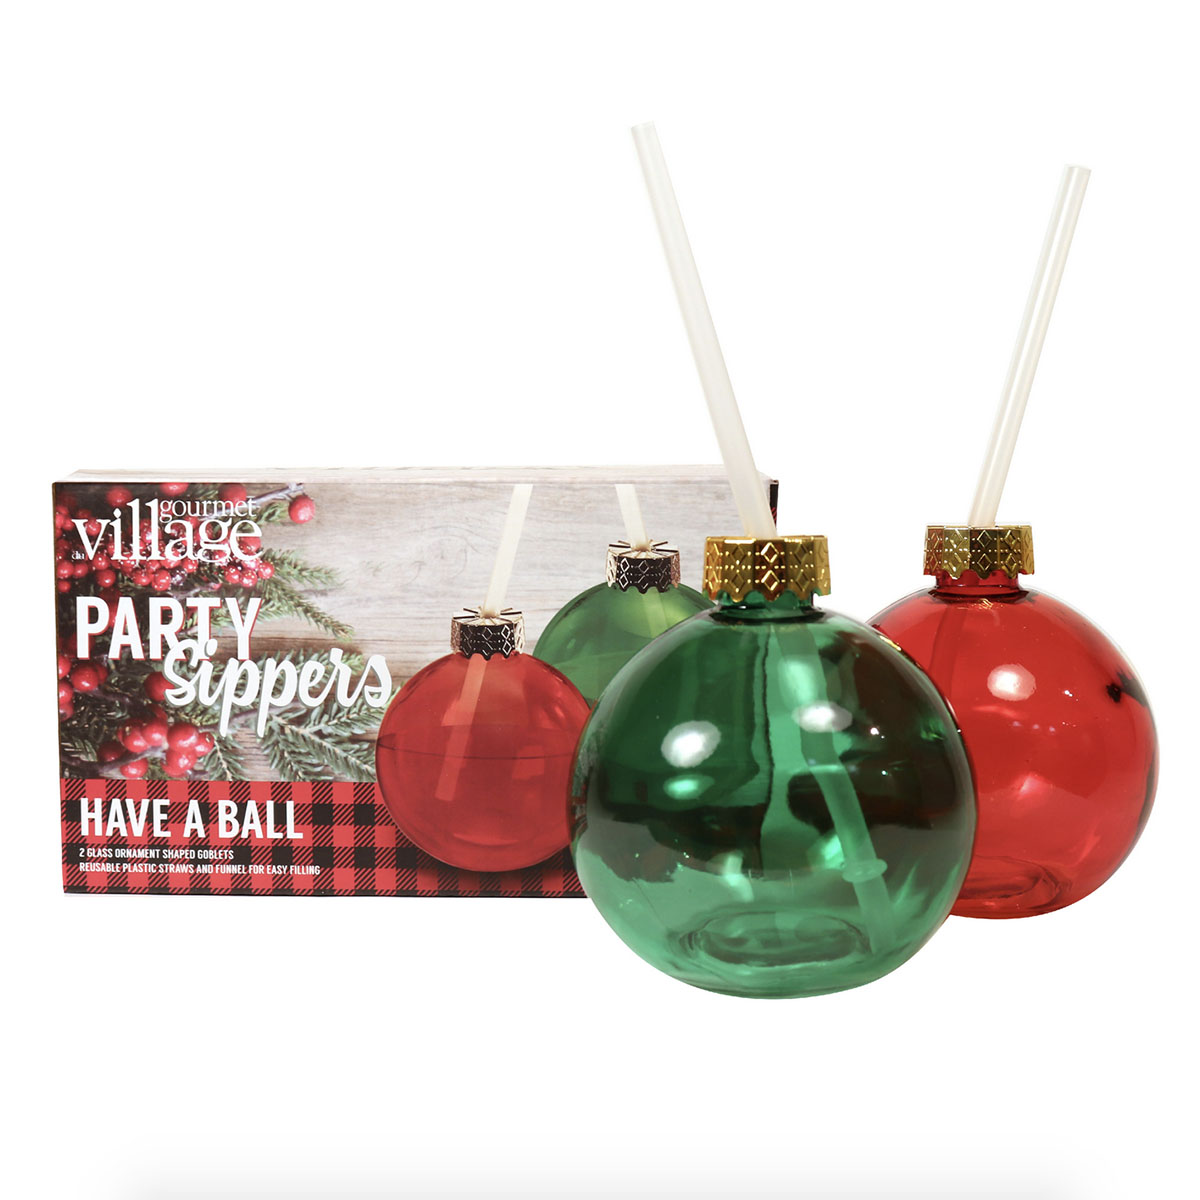 Festive Party Sippers